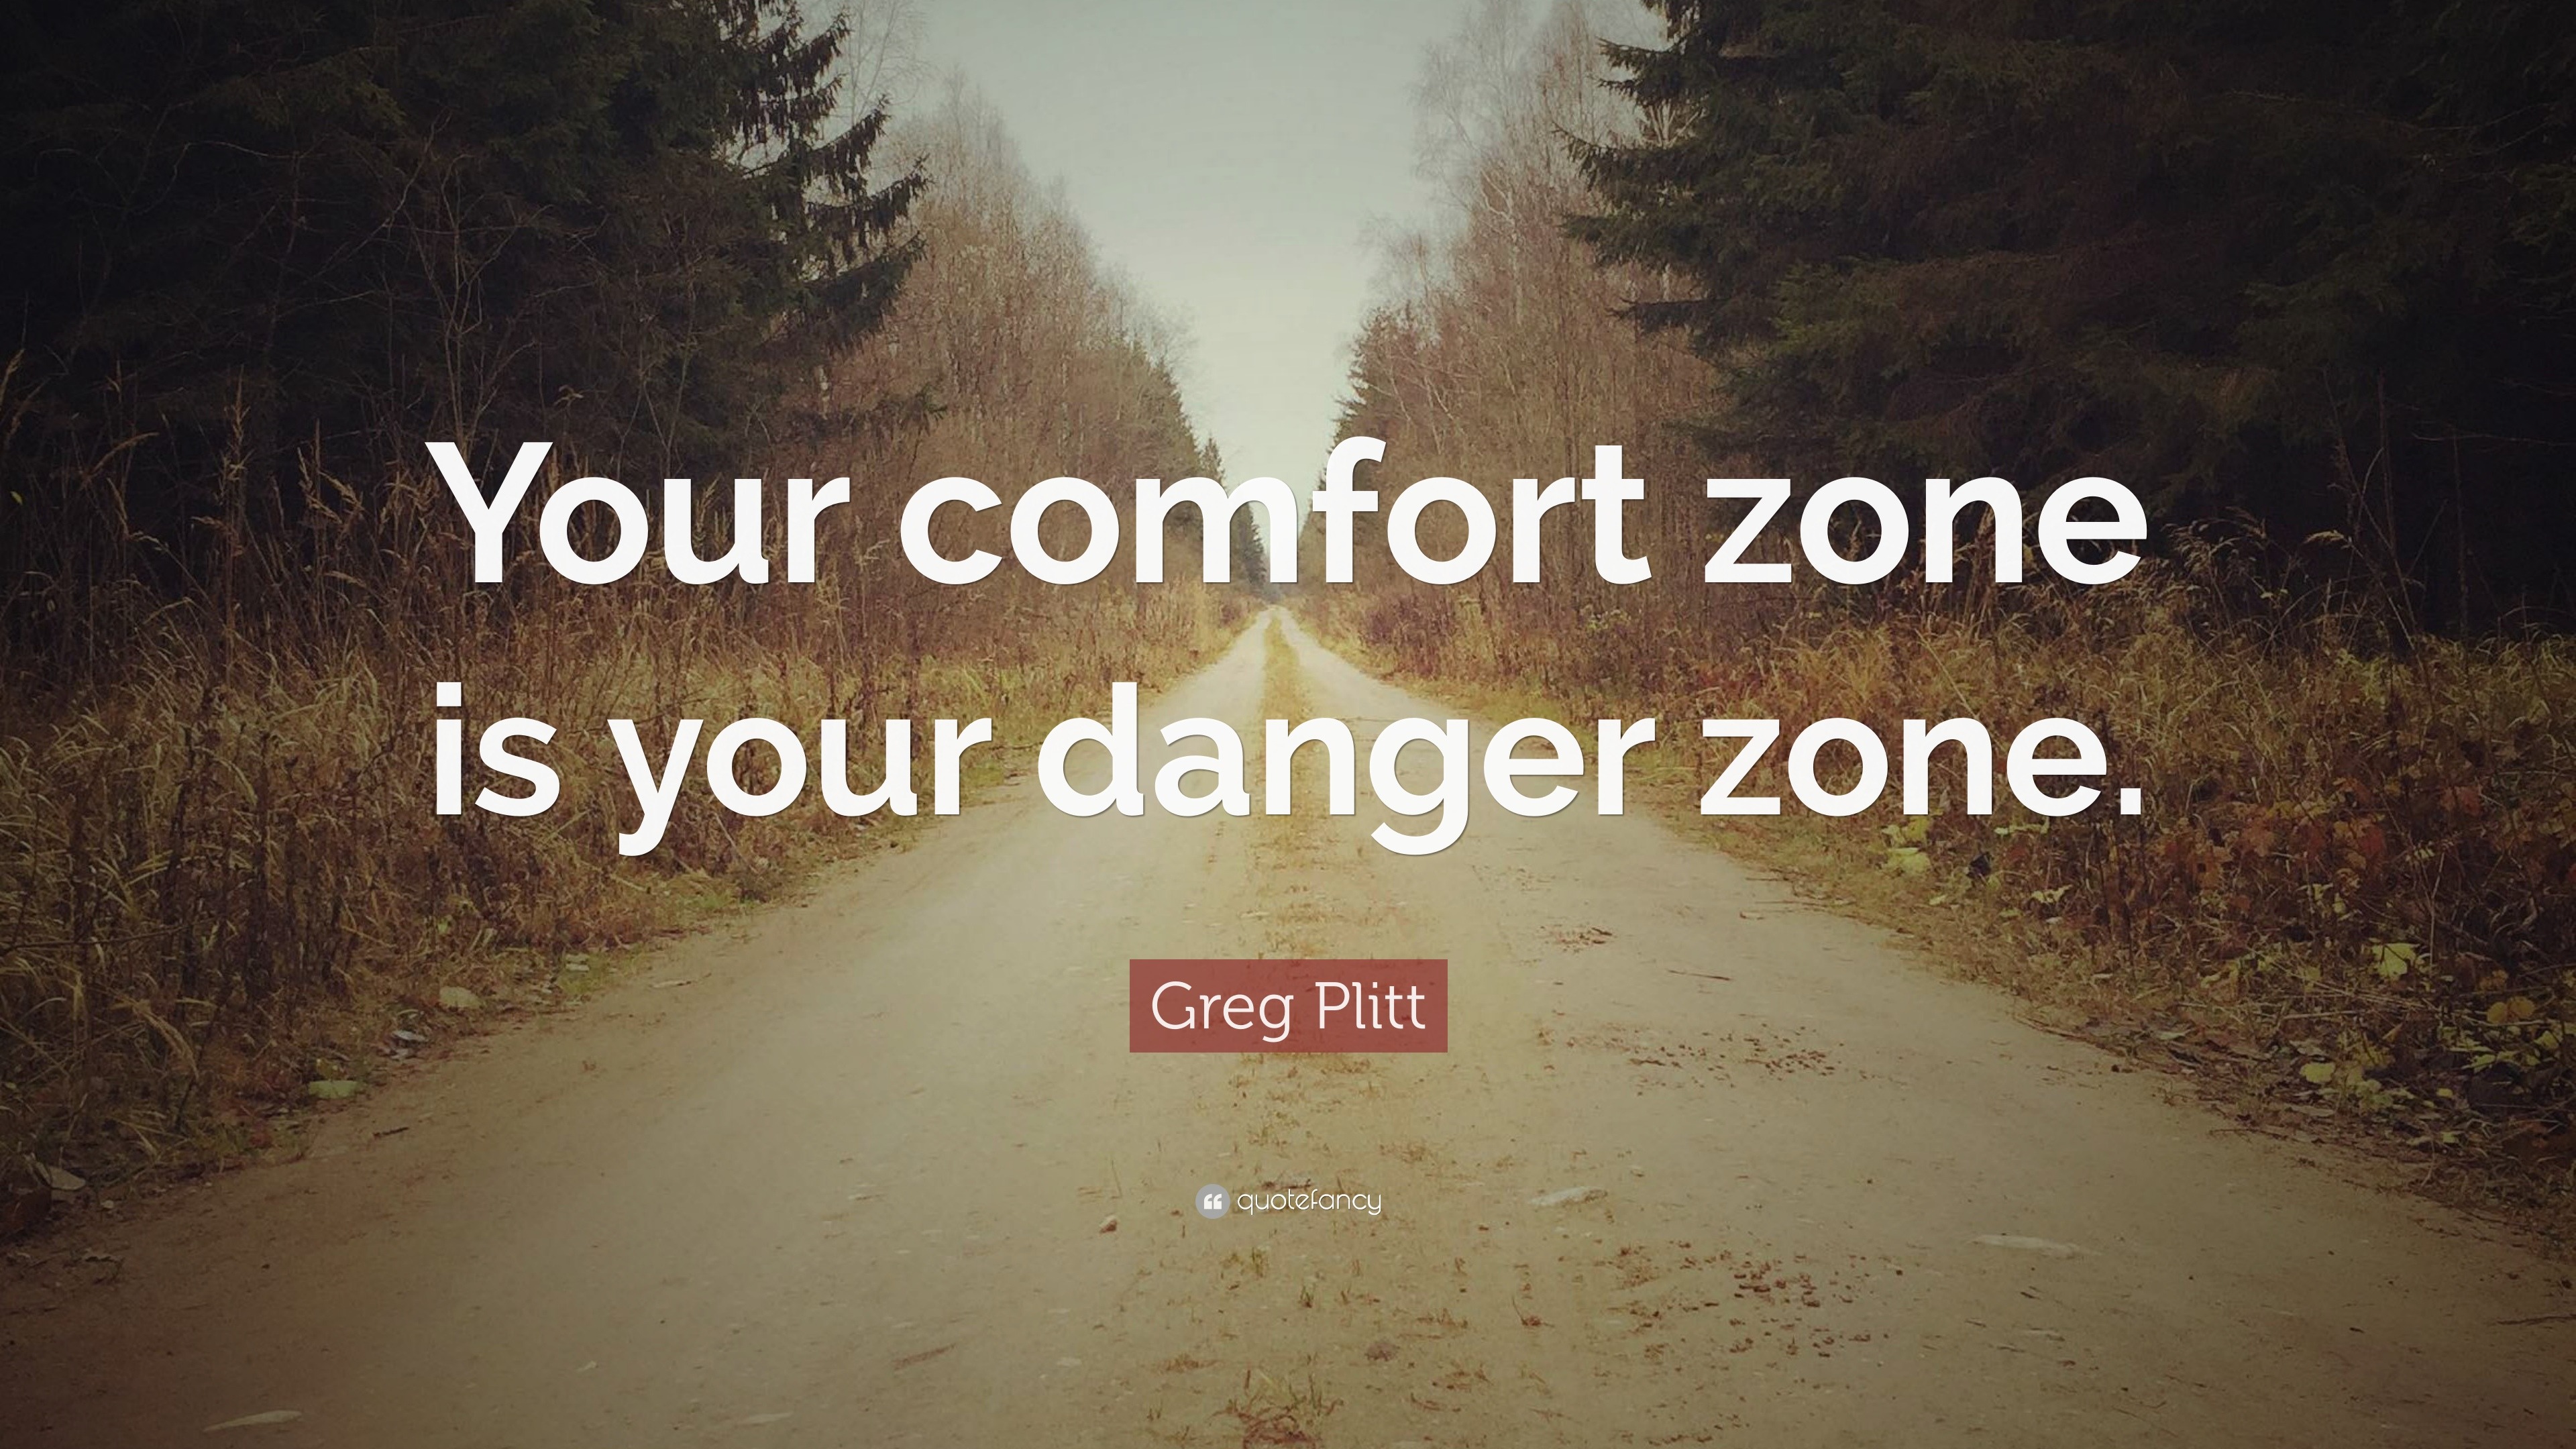 The Comfort Zone. Comfort Zone: Exploring the Fear Zone…, by Jossie